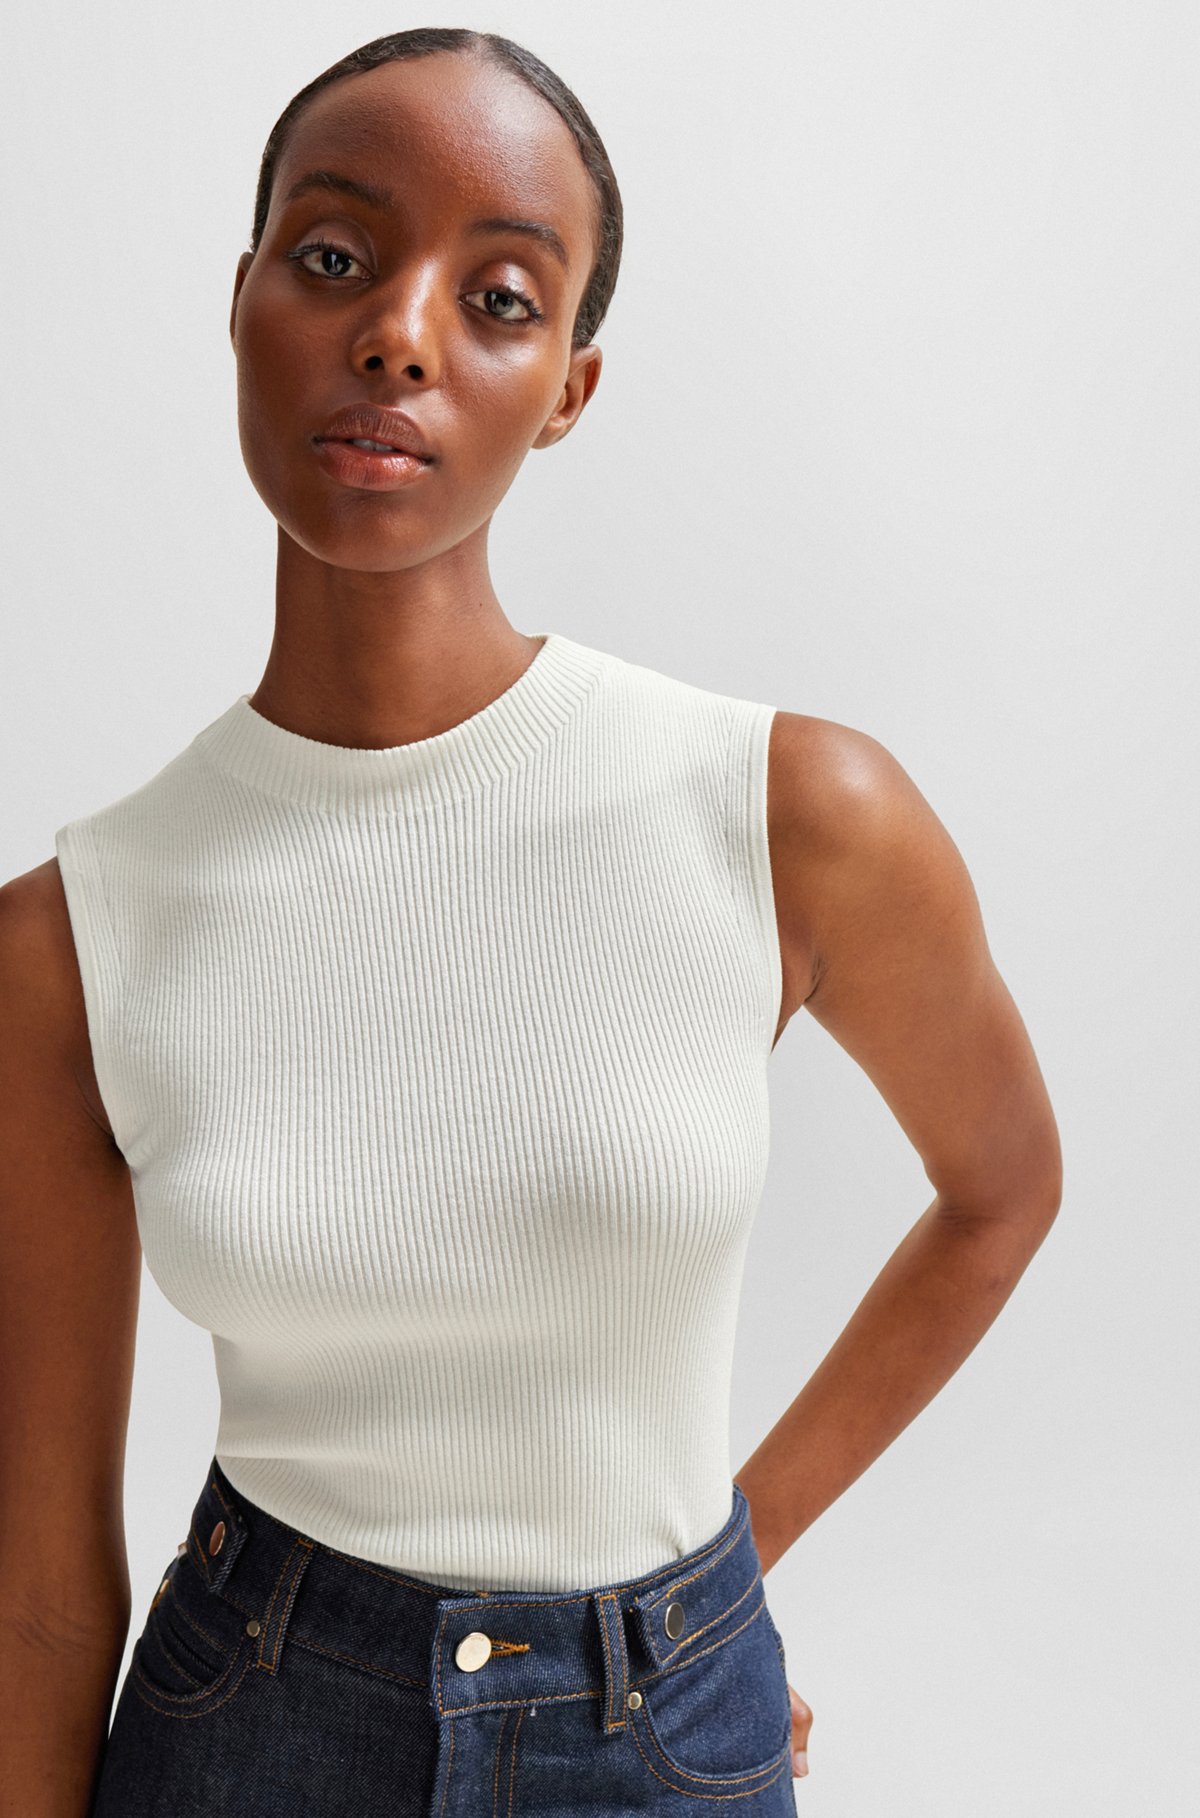 BOSS - Sleeveless mock-neck top with ribbed structure